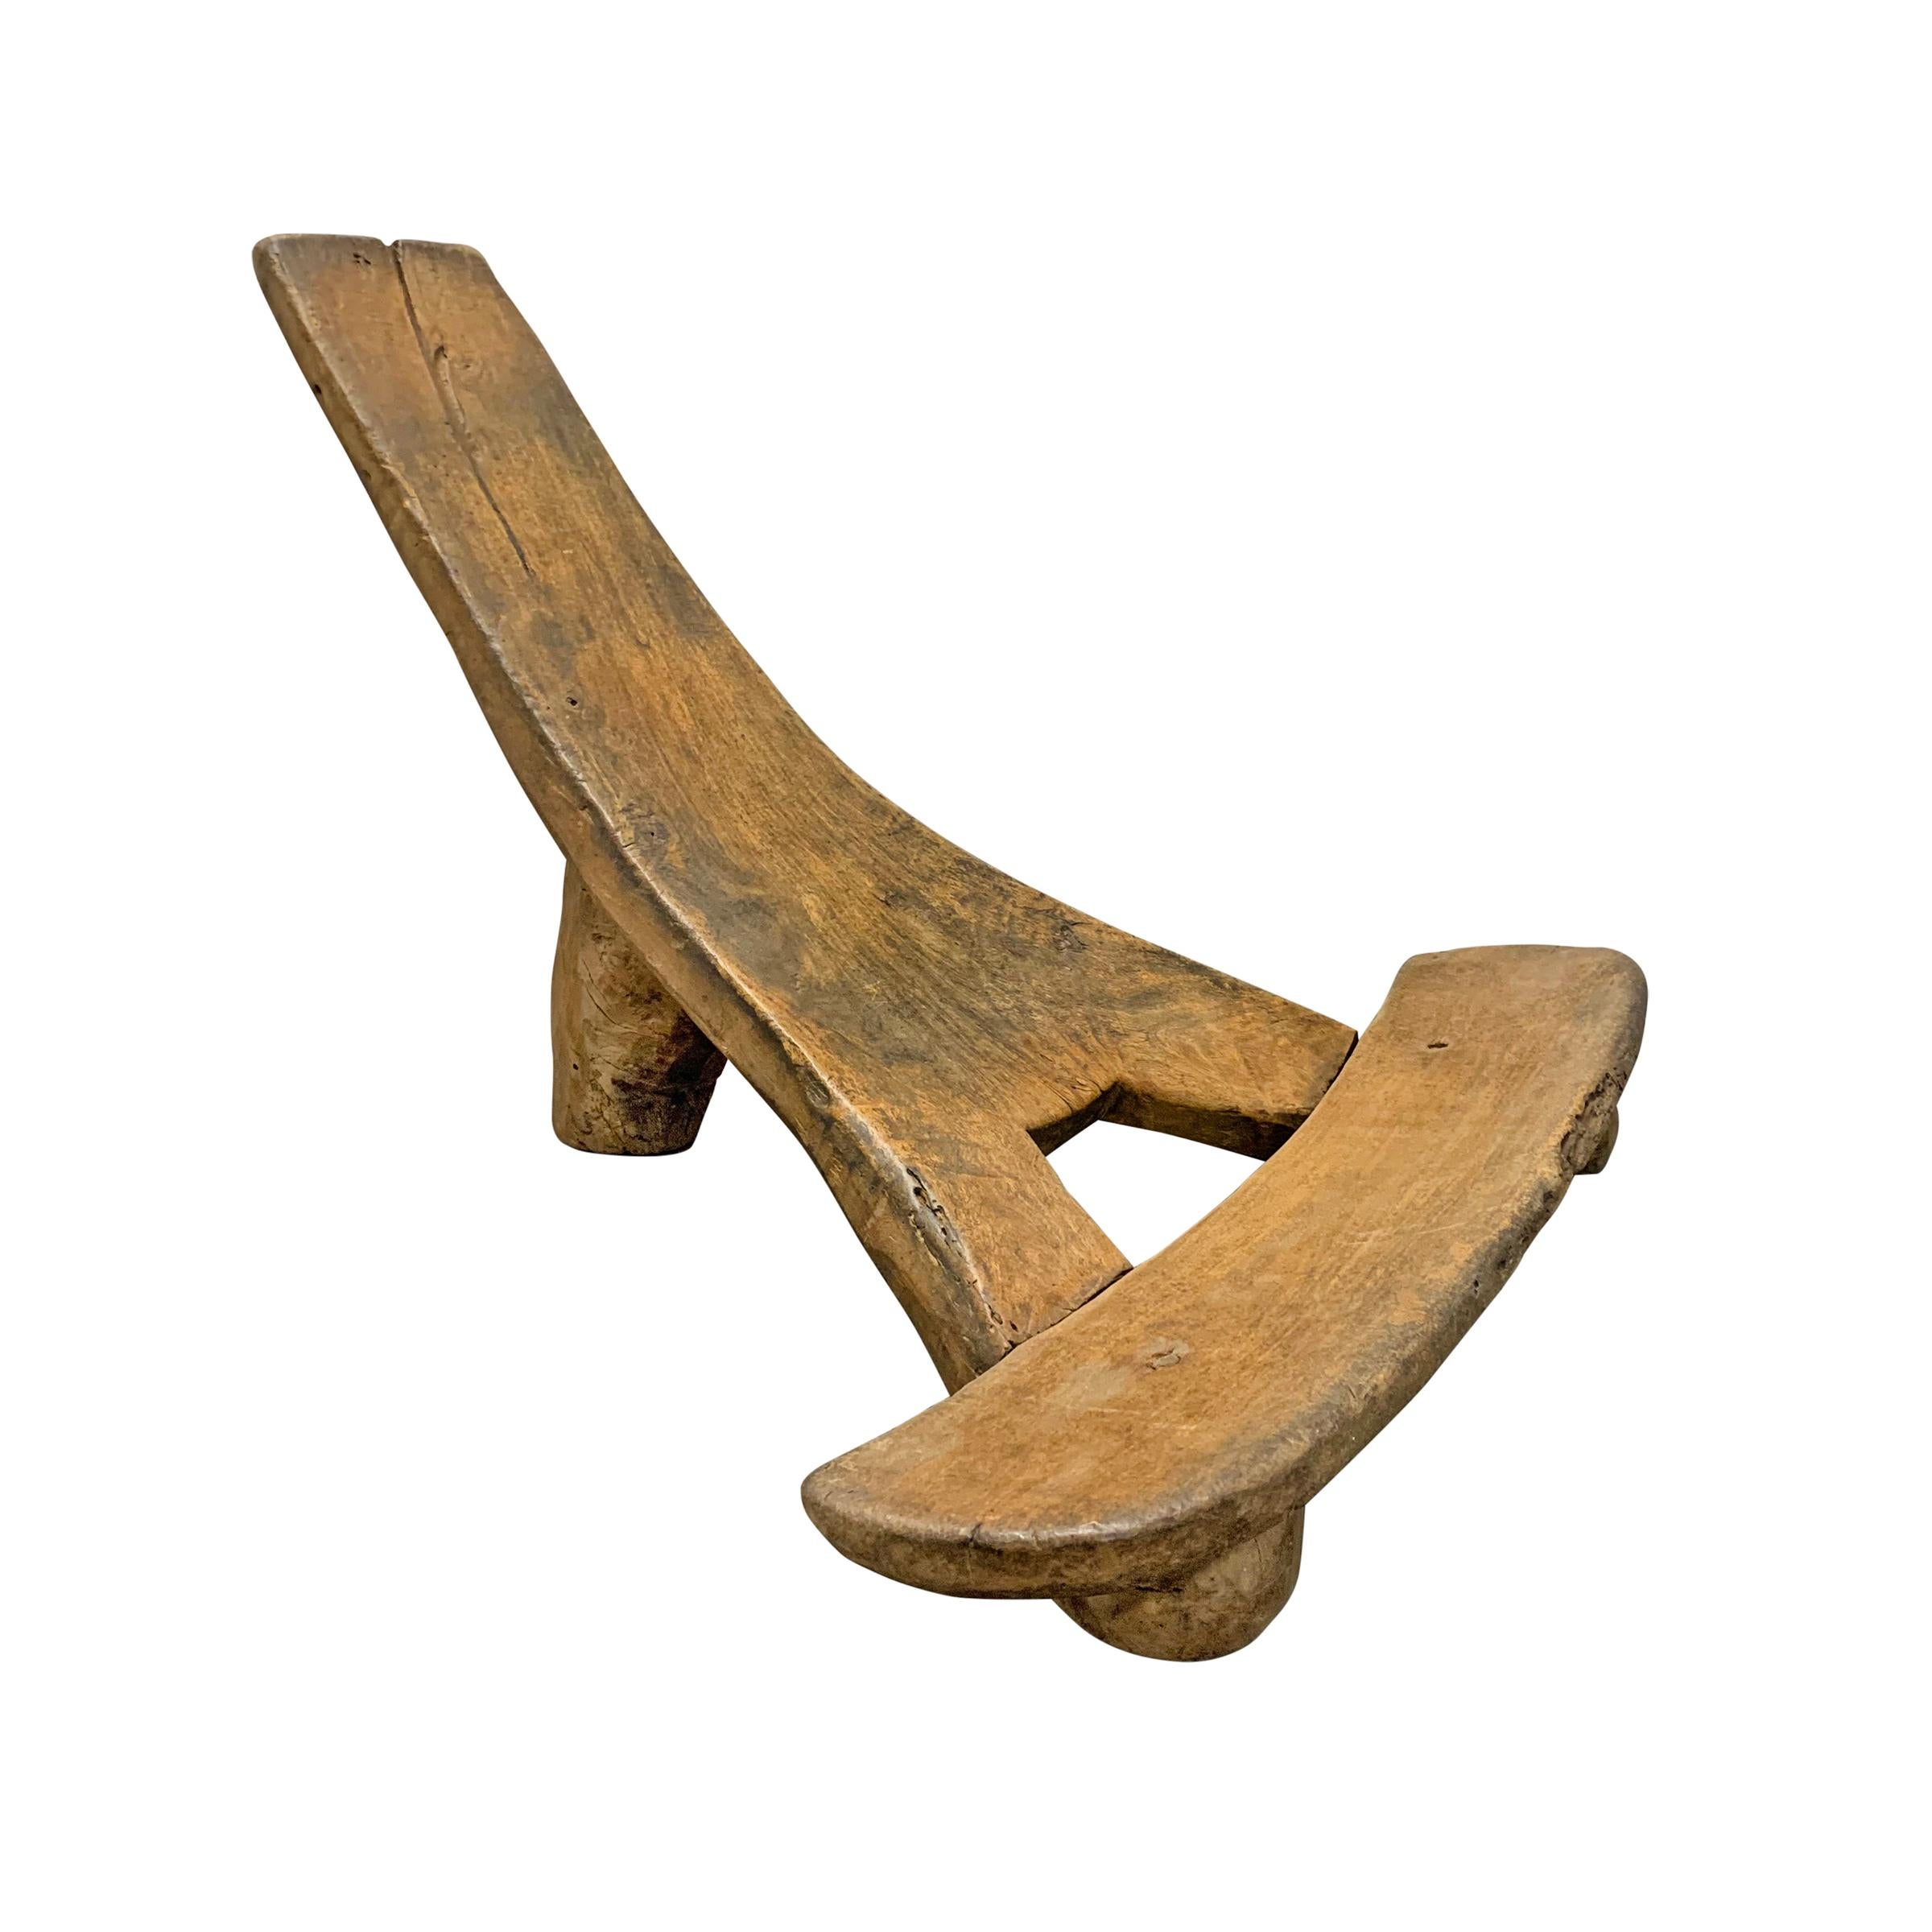 A wonderfully sculptural low chaise from the Tiv people of Nigeria, carved of two pieces of wood with the seat being one piece and the Y-shaped back and leg being another. Excellent modern form and wonderful patina!